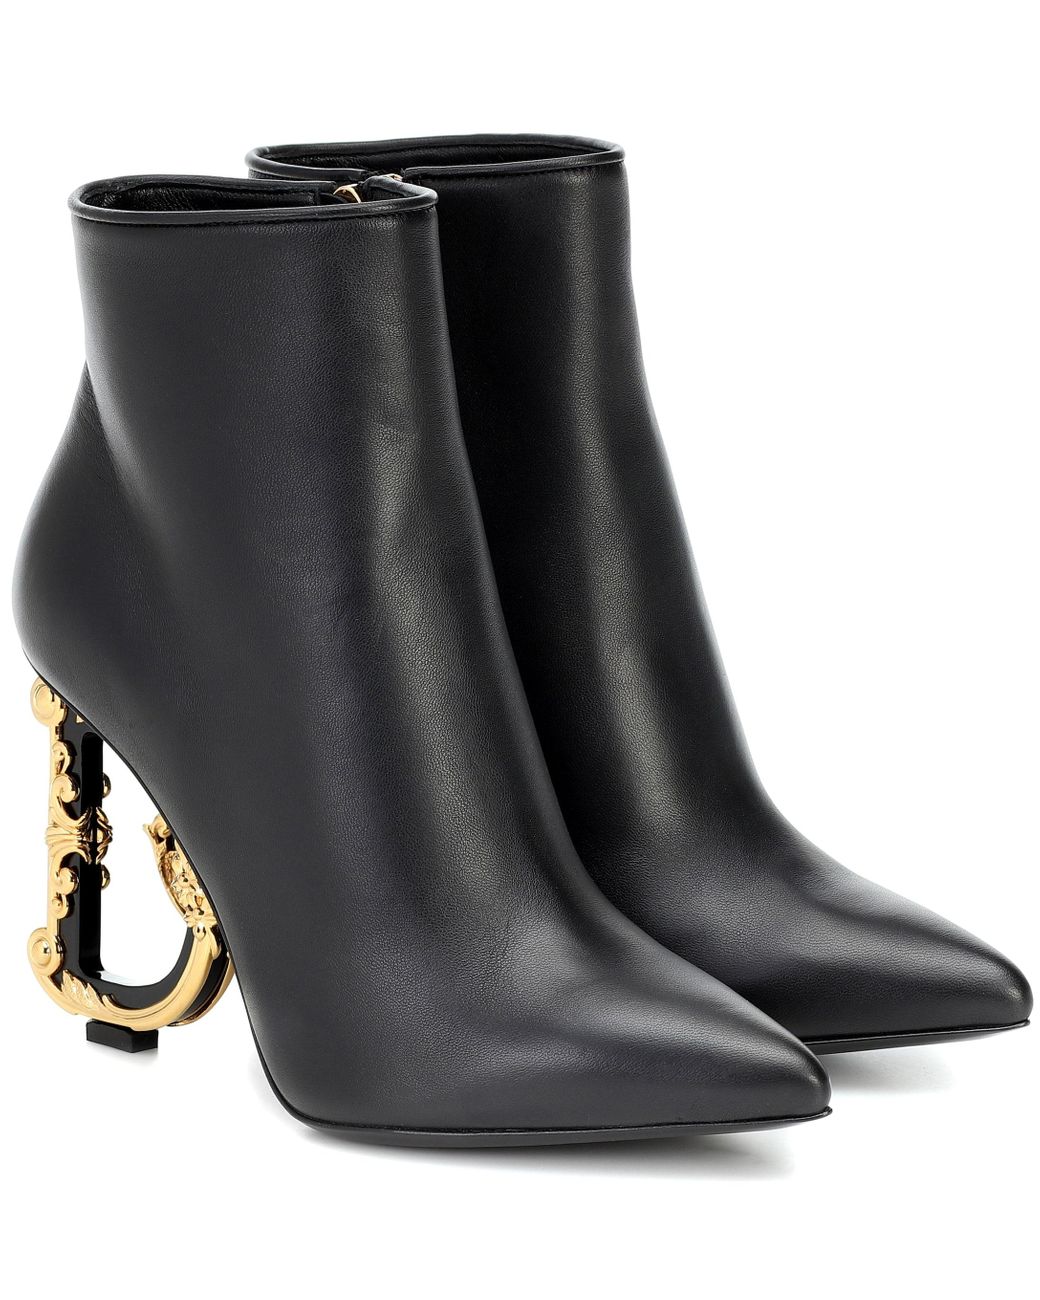 Dolce & Gabbana Devotion Leather Ankle Boots in Black - Lyst